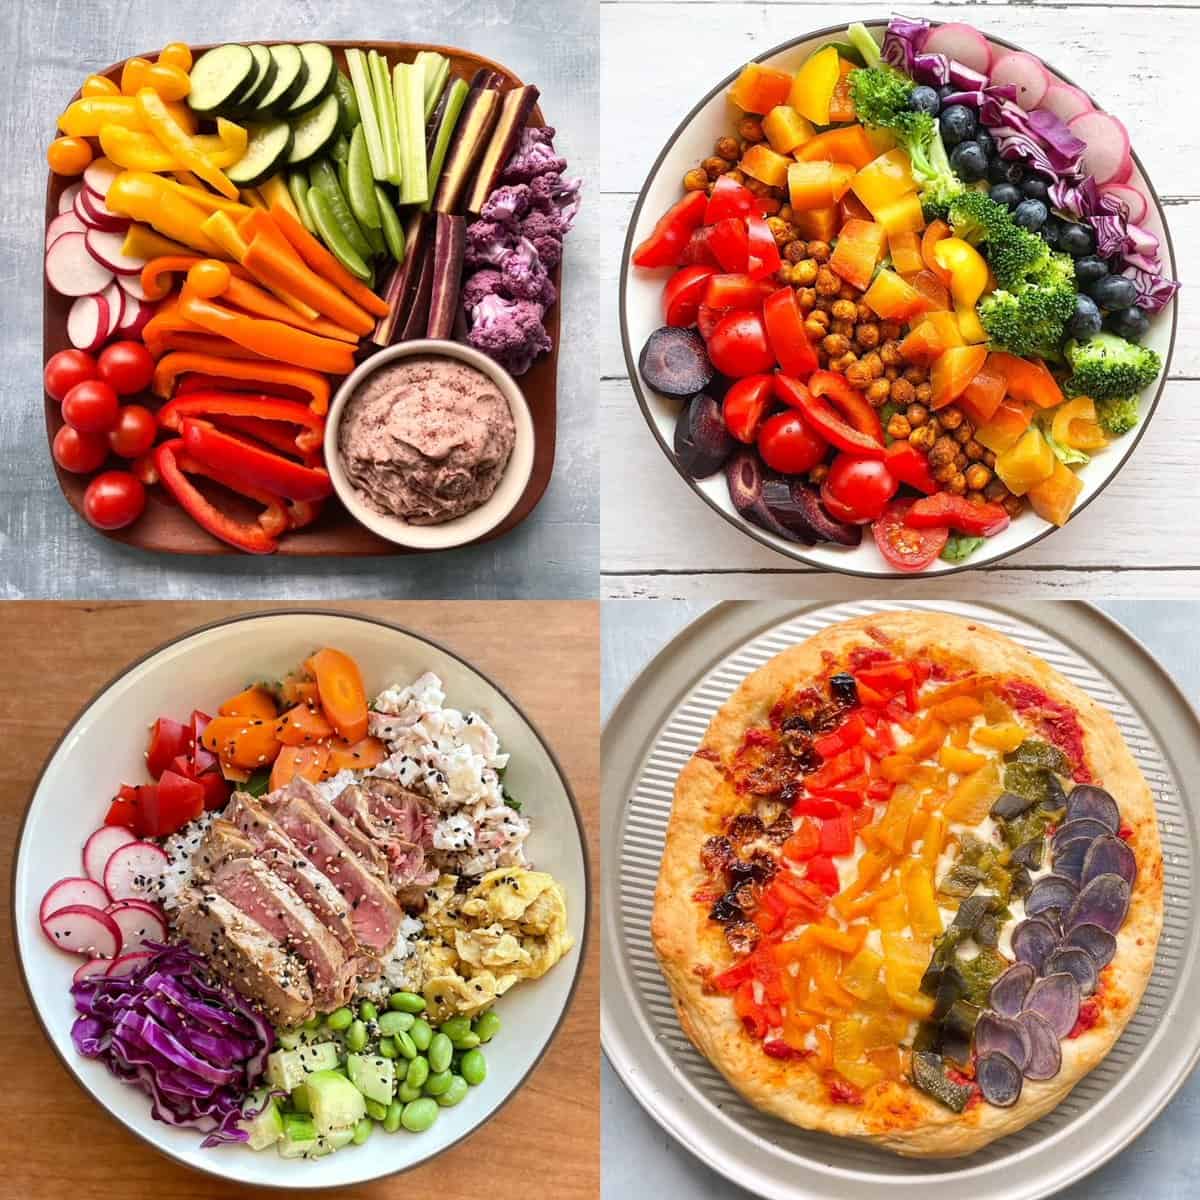 four images of rainbow bowls and plates with rainbow veggies on the top left, rainbow salad on the top right, rainbow poke bowl bottom left, and rainbow pizza bottom right.